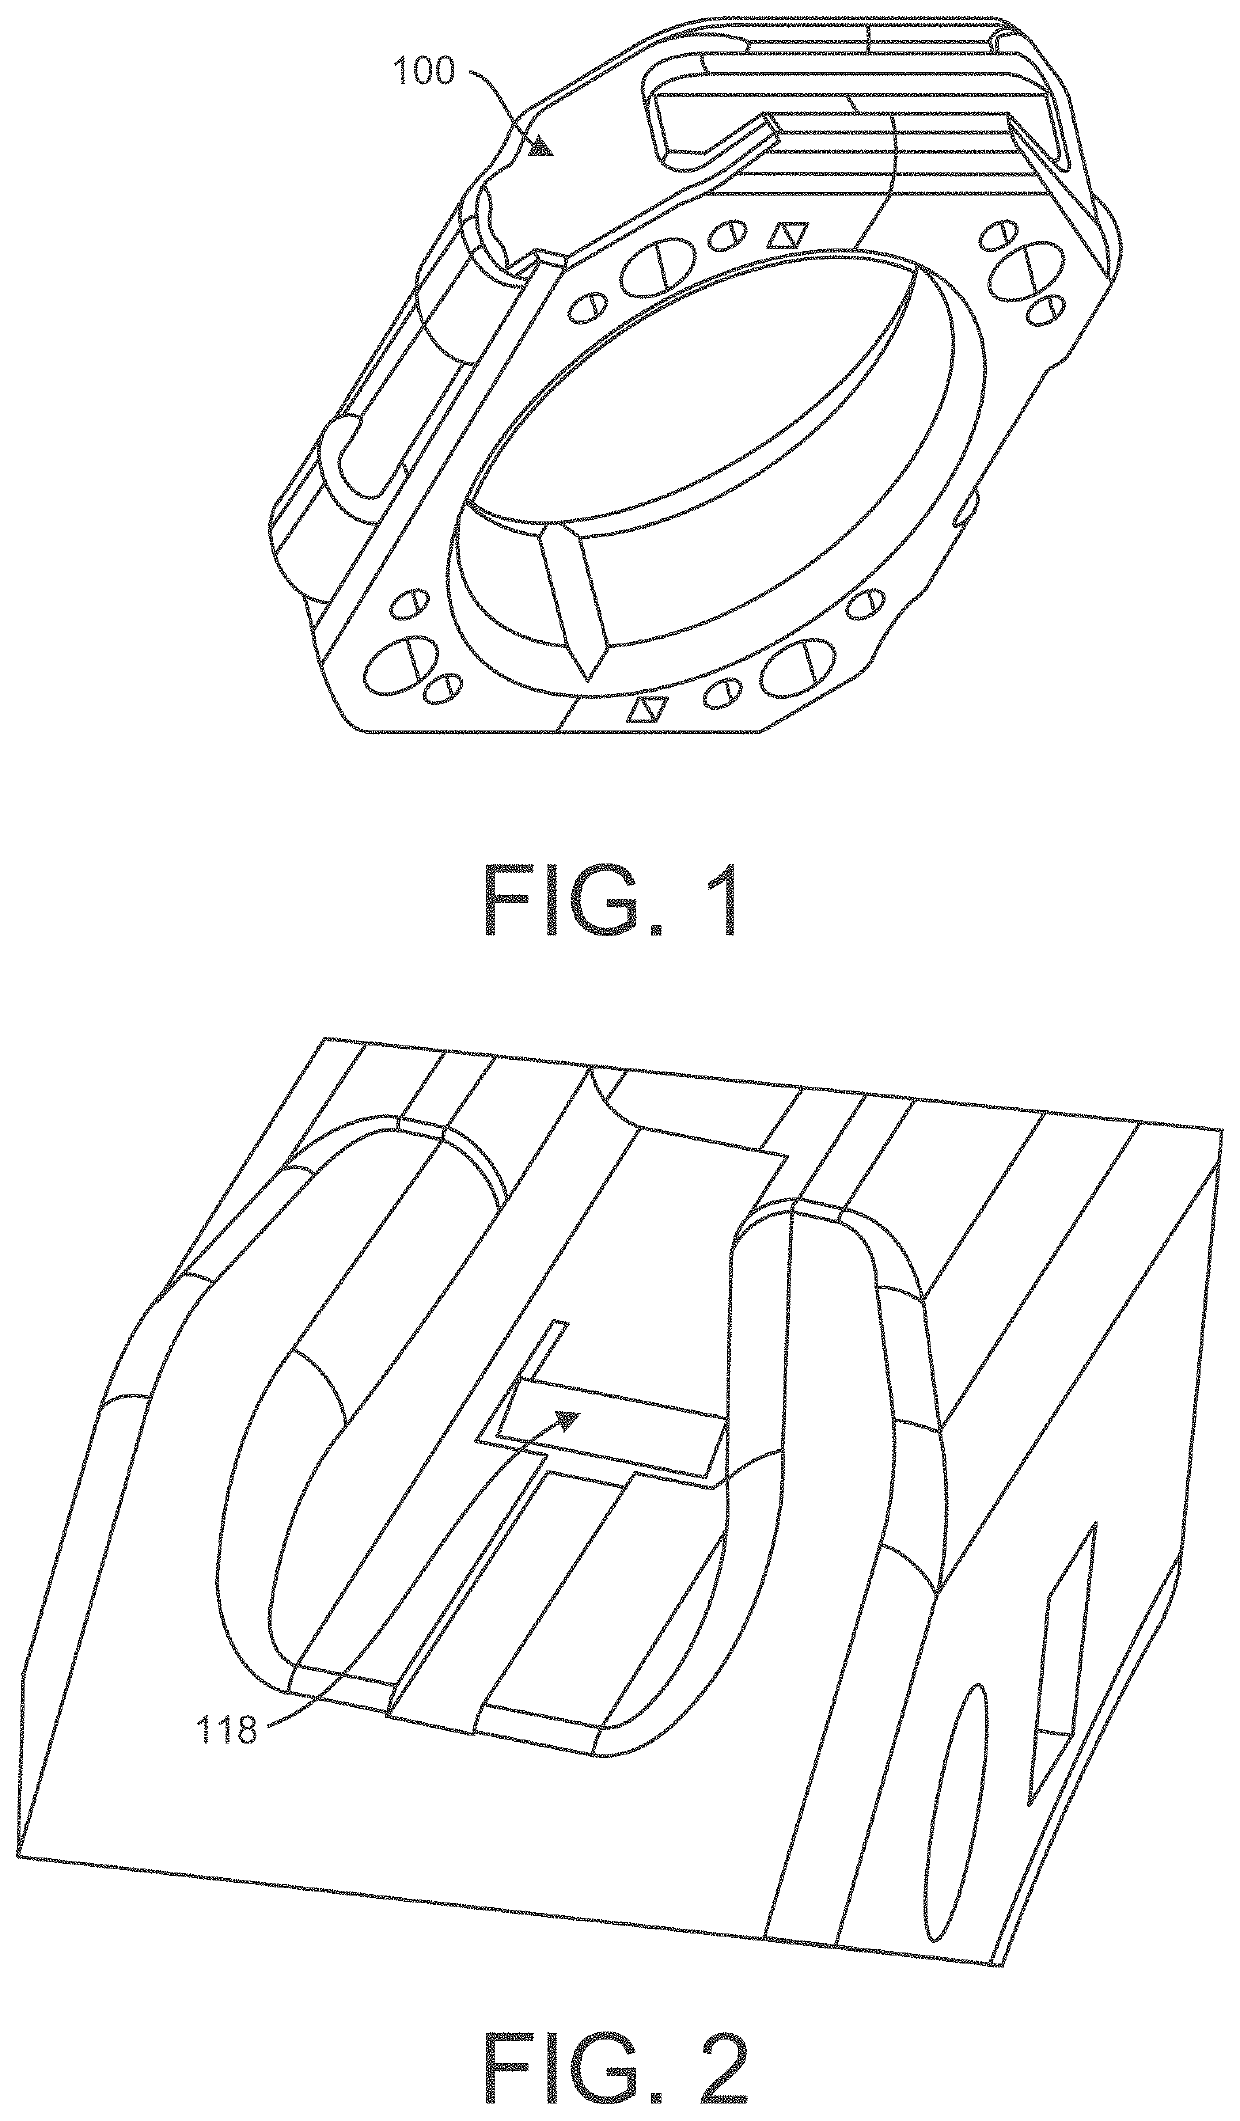 Inter-connecting locking mechanism and grip channel